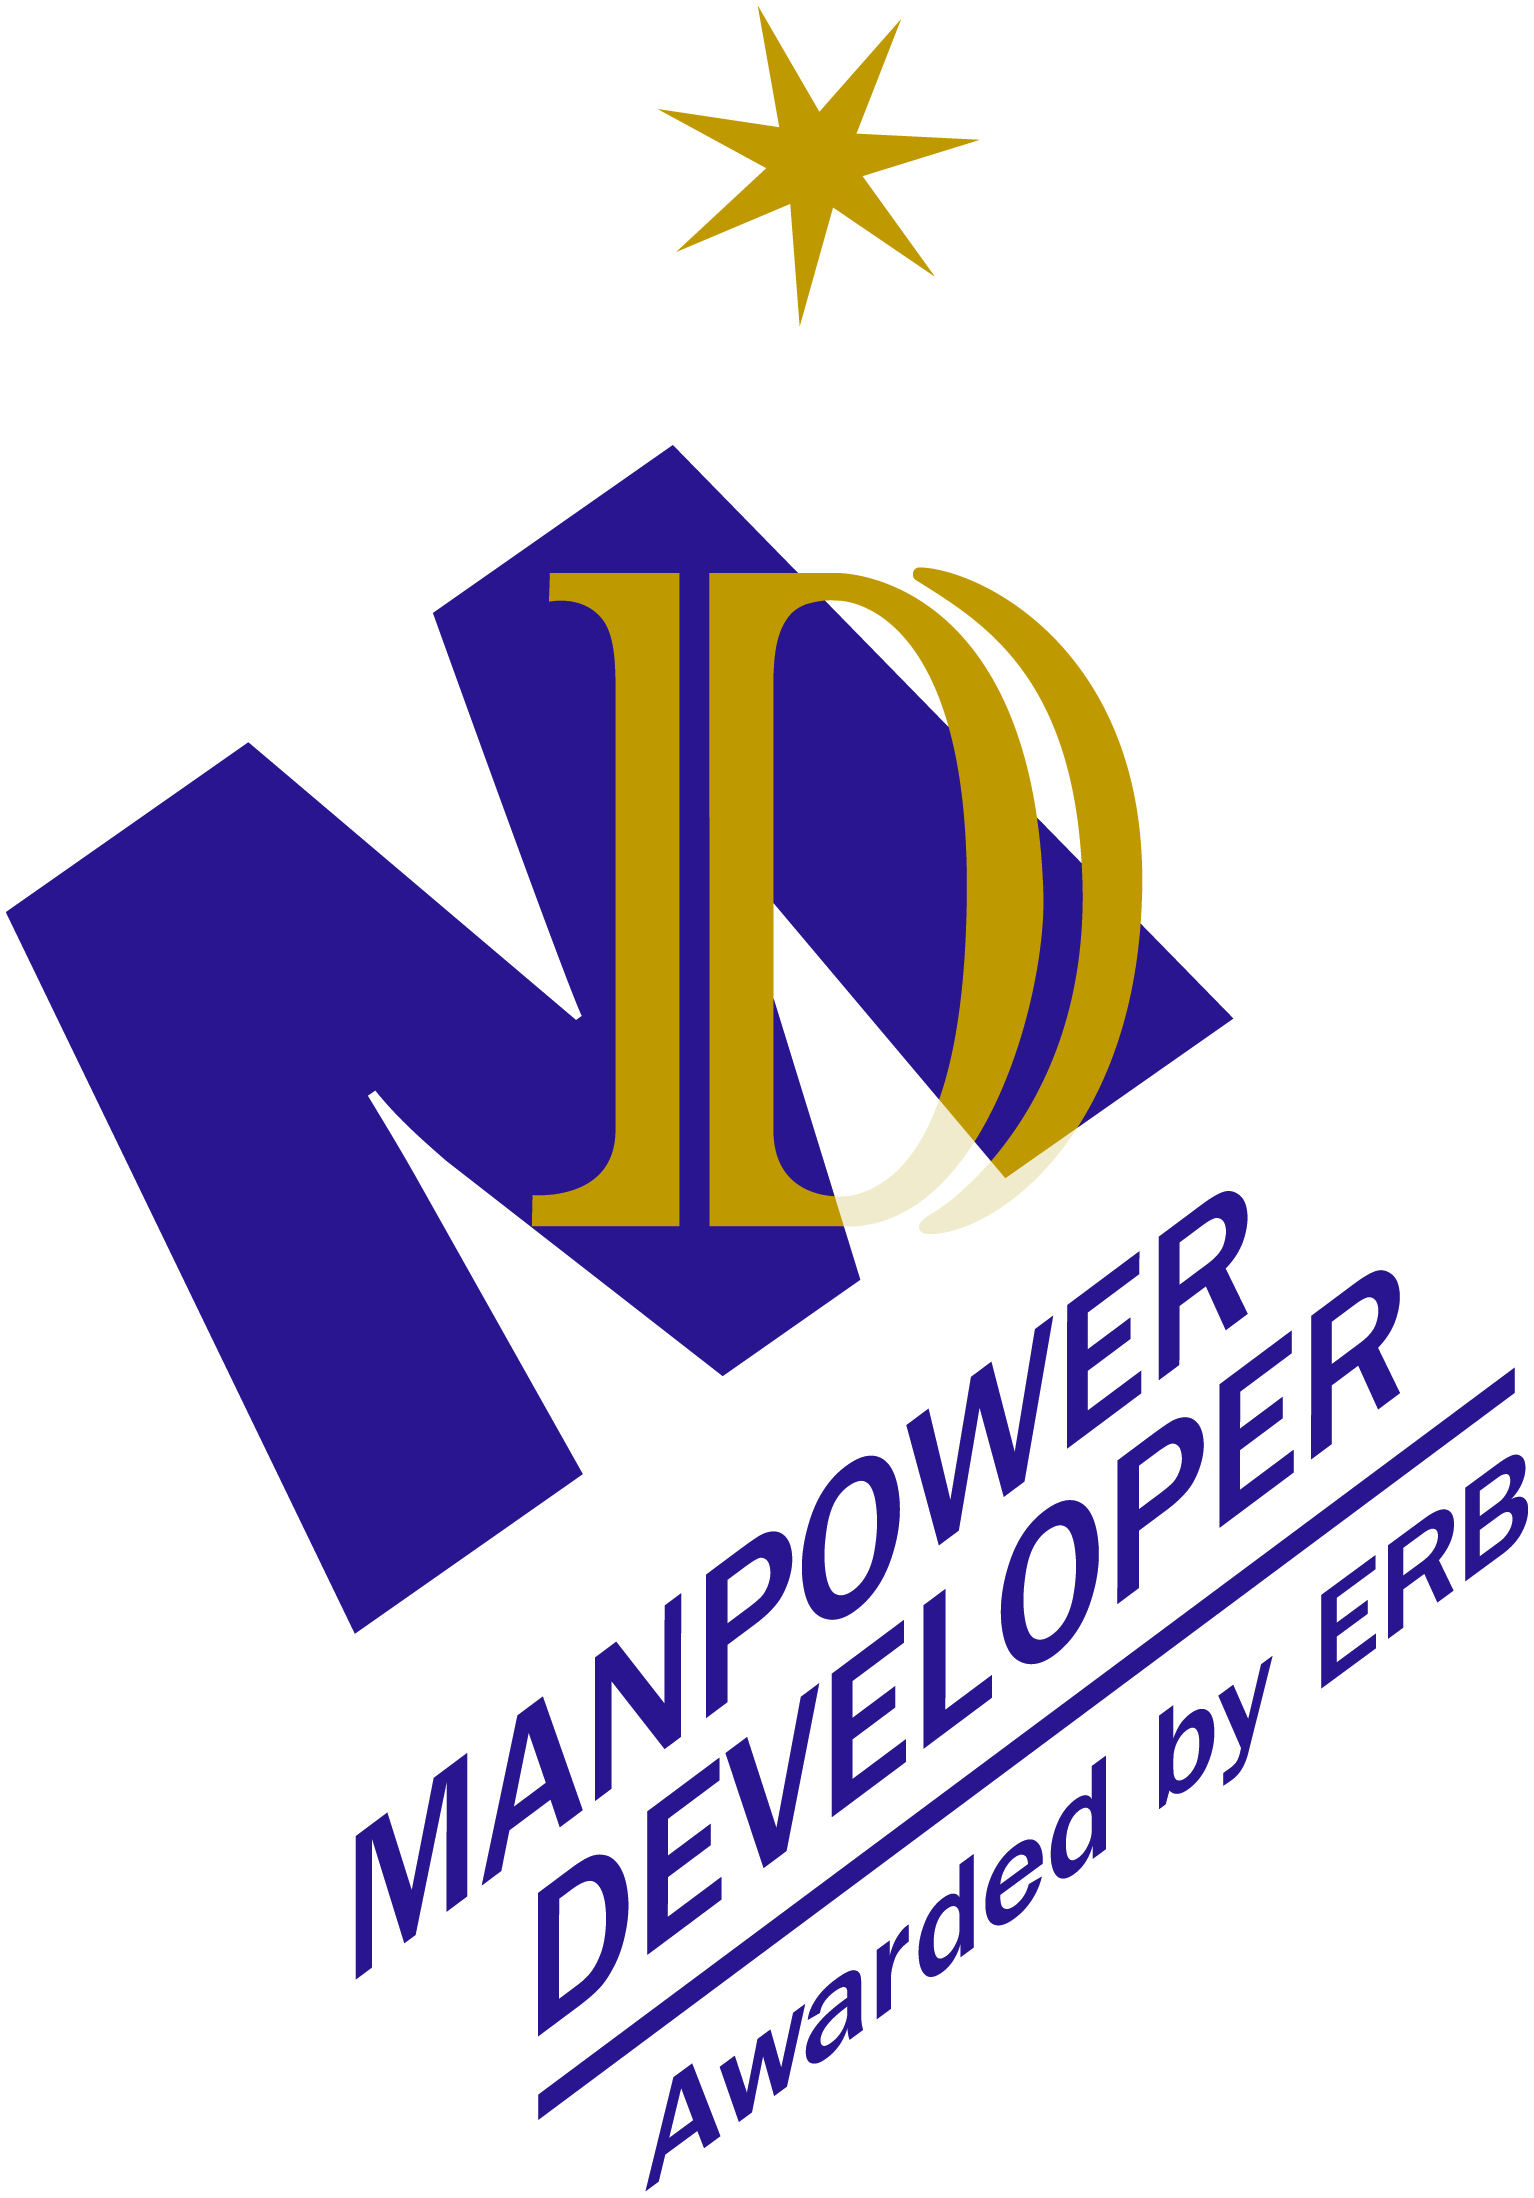  "Manpower Developer" Logo in recognition of Observatory's achievements